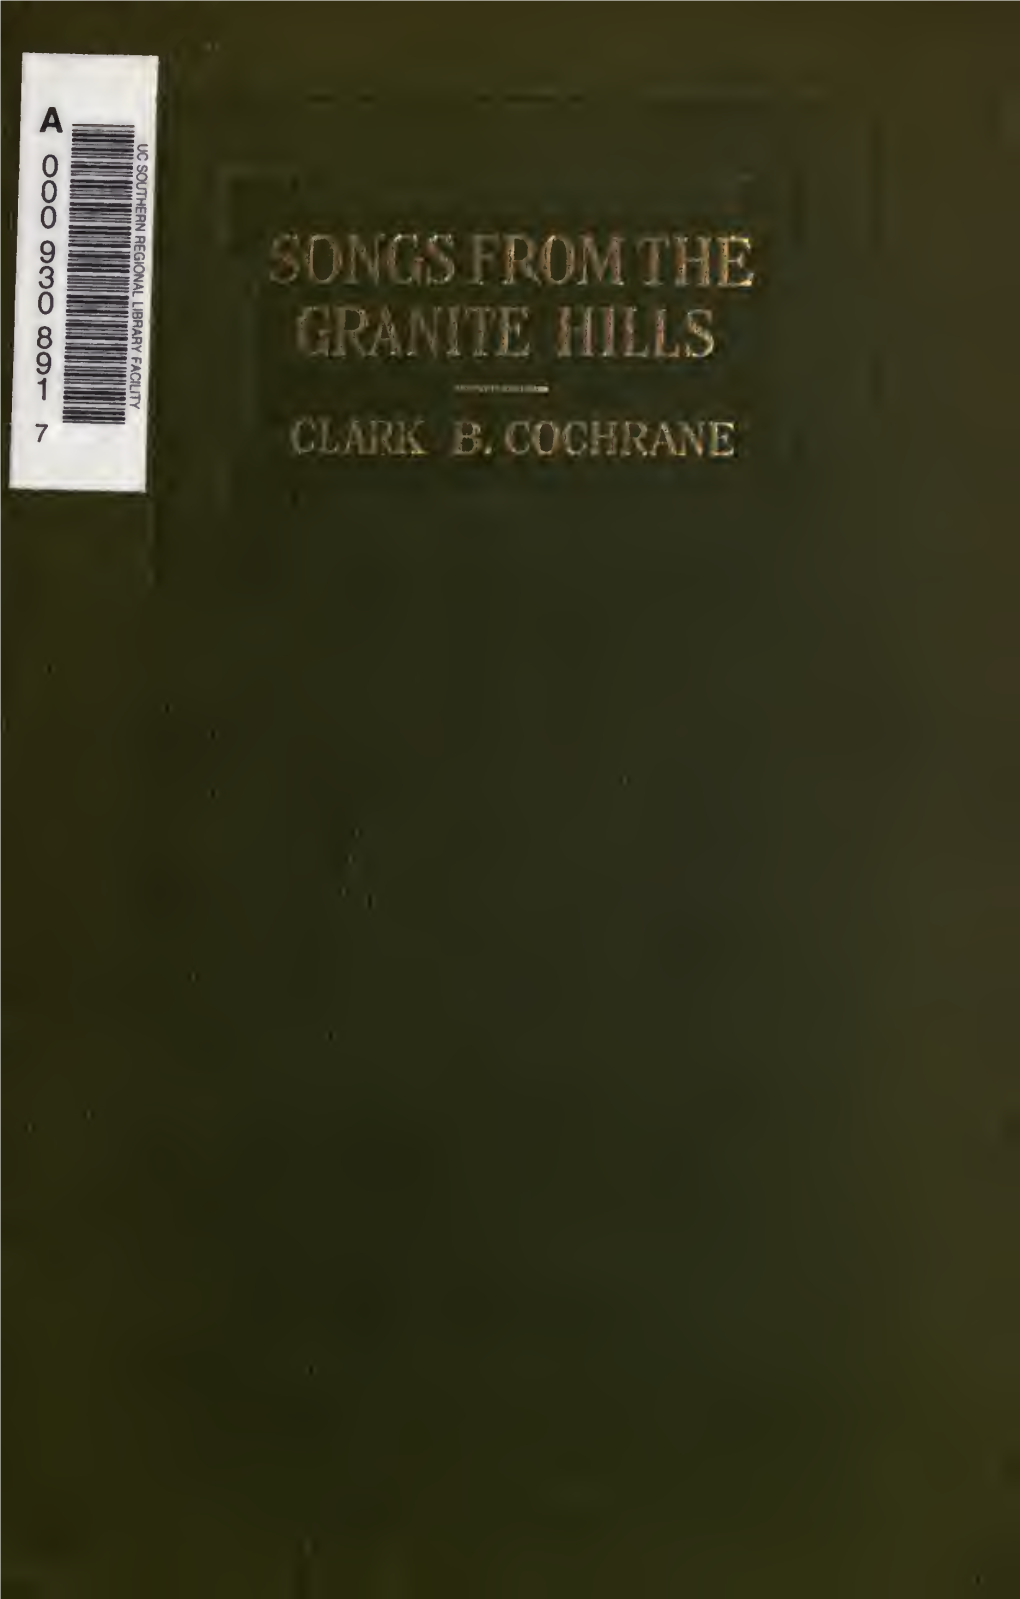 Songs from the Granite Hills